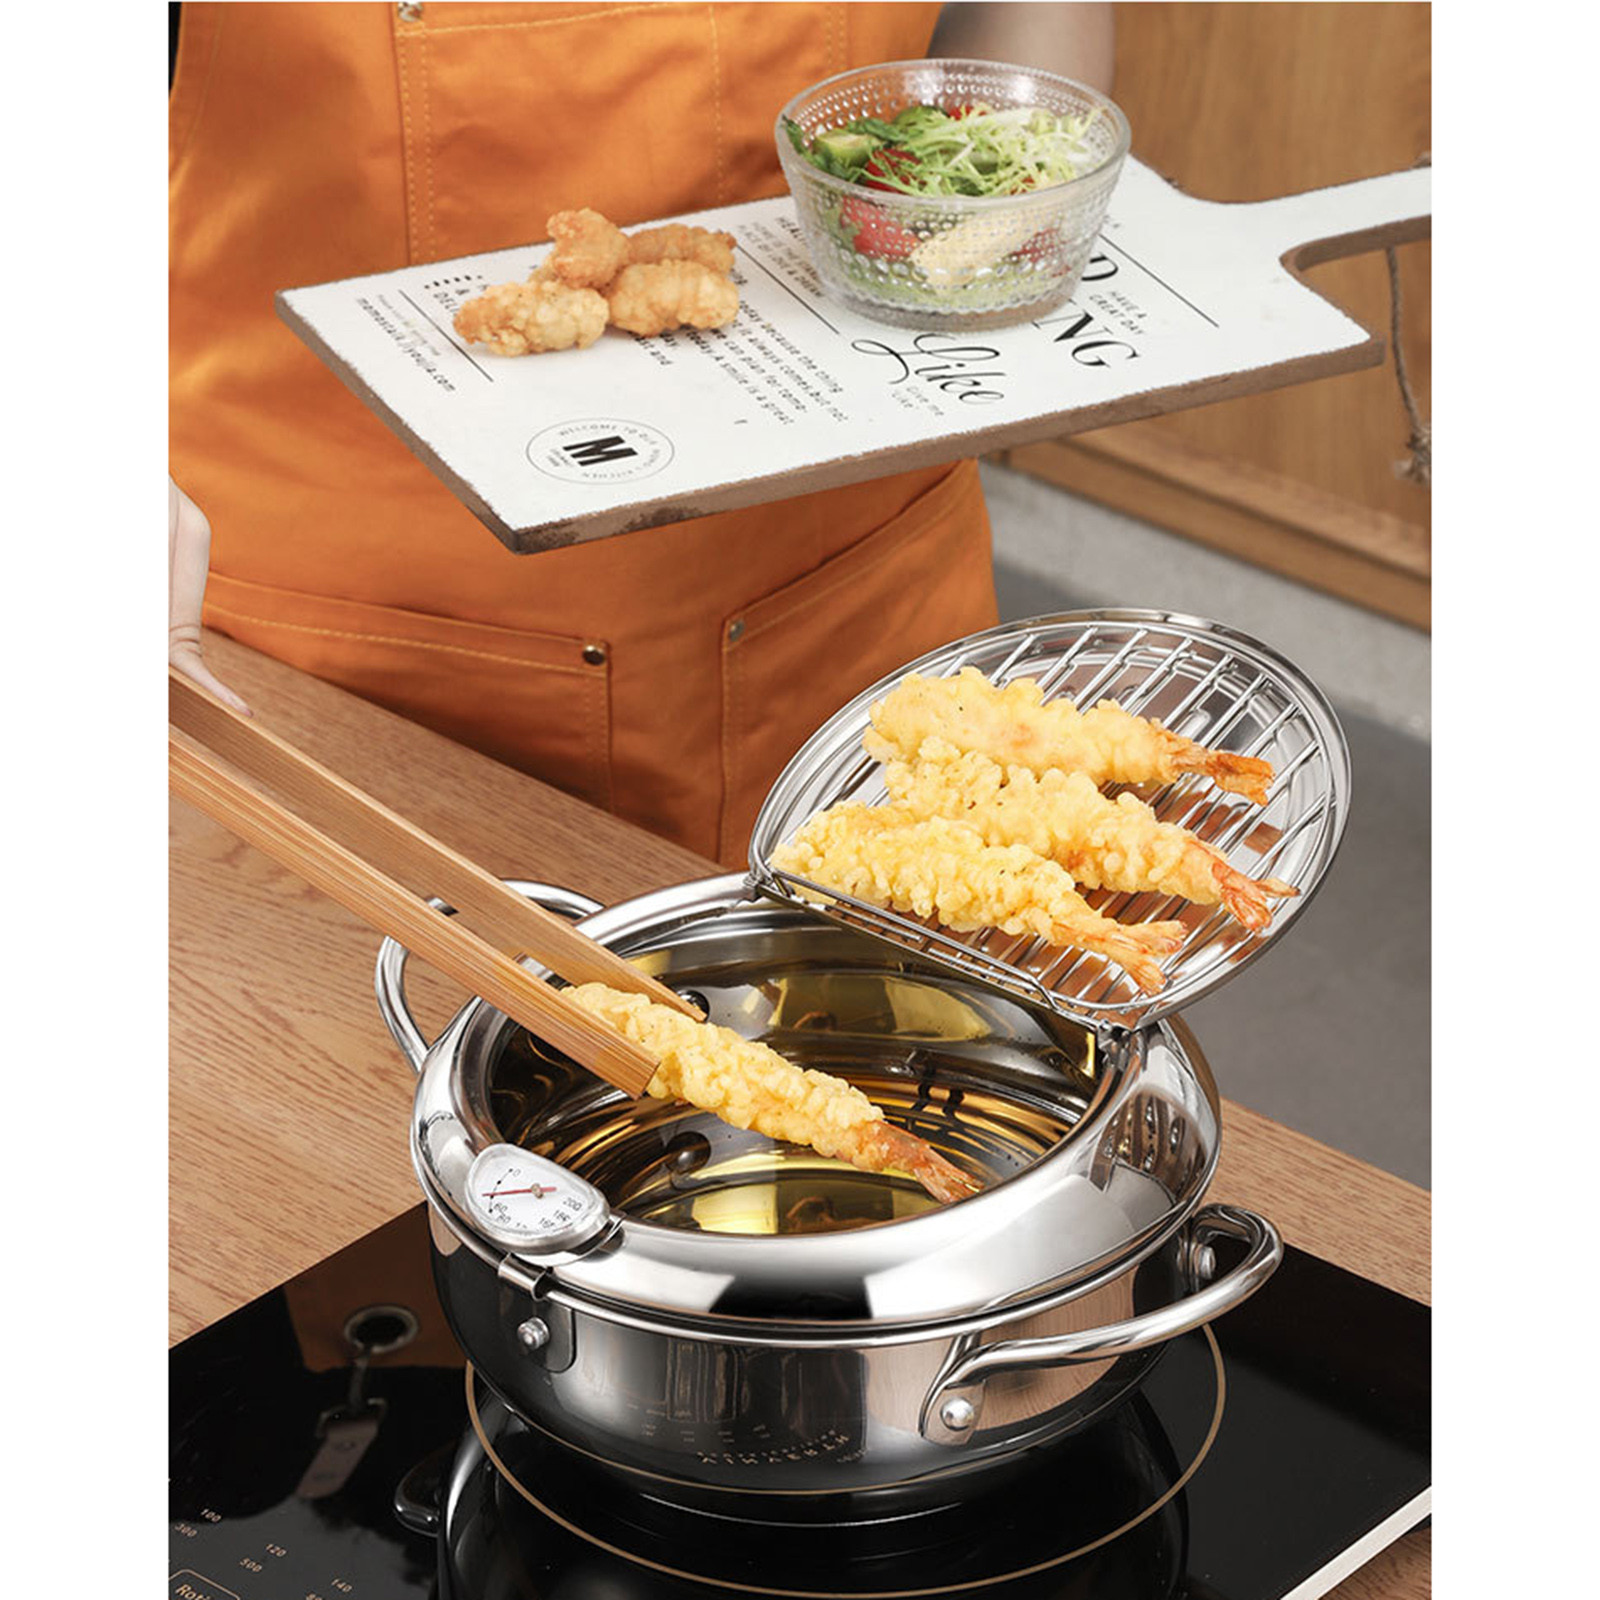 Kitchen Deep Frying Pot Thermometre Tempura Fryer Pan Temperature Control Fried Chicken Pot Cooking Tools Stainless Steel #T3G